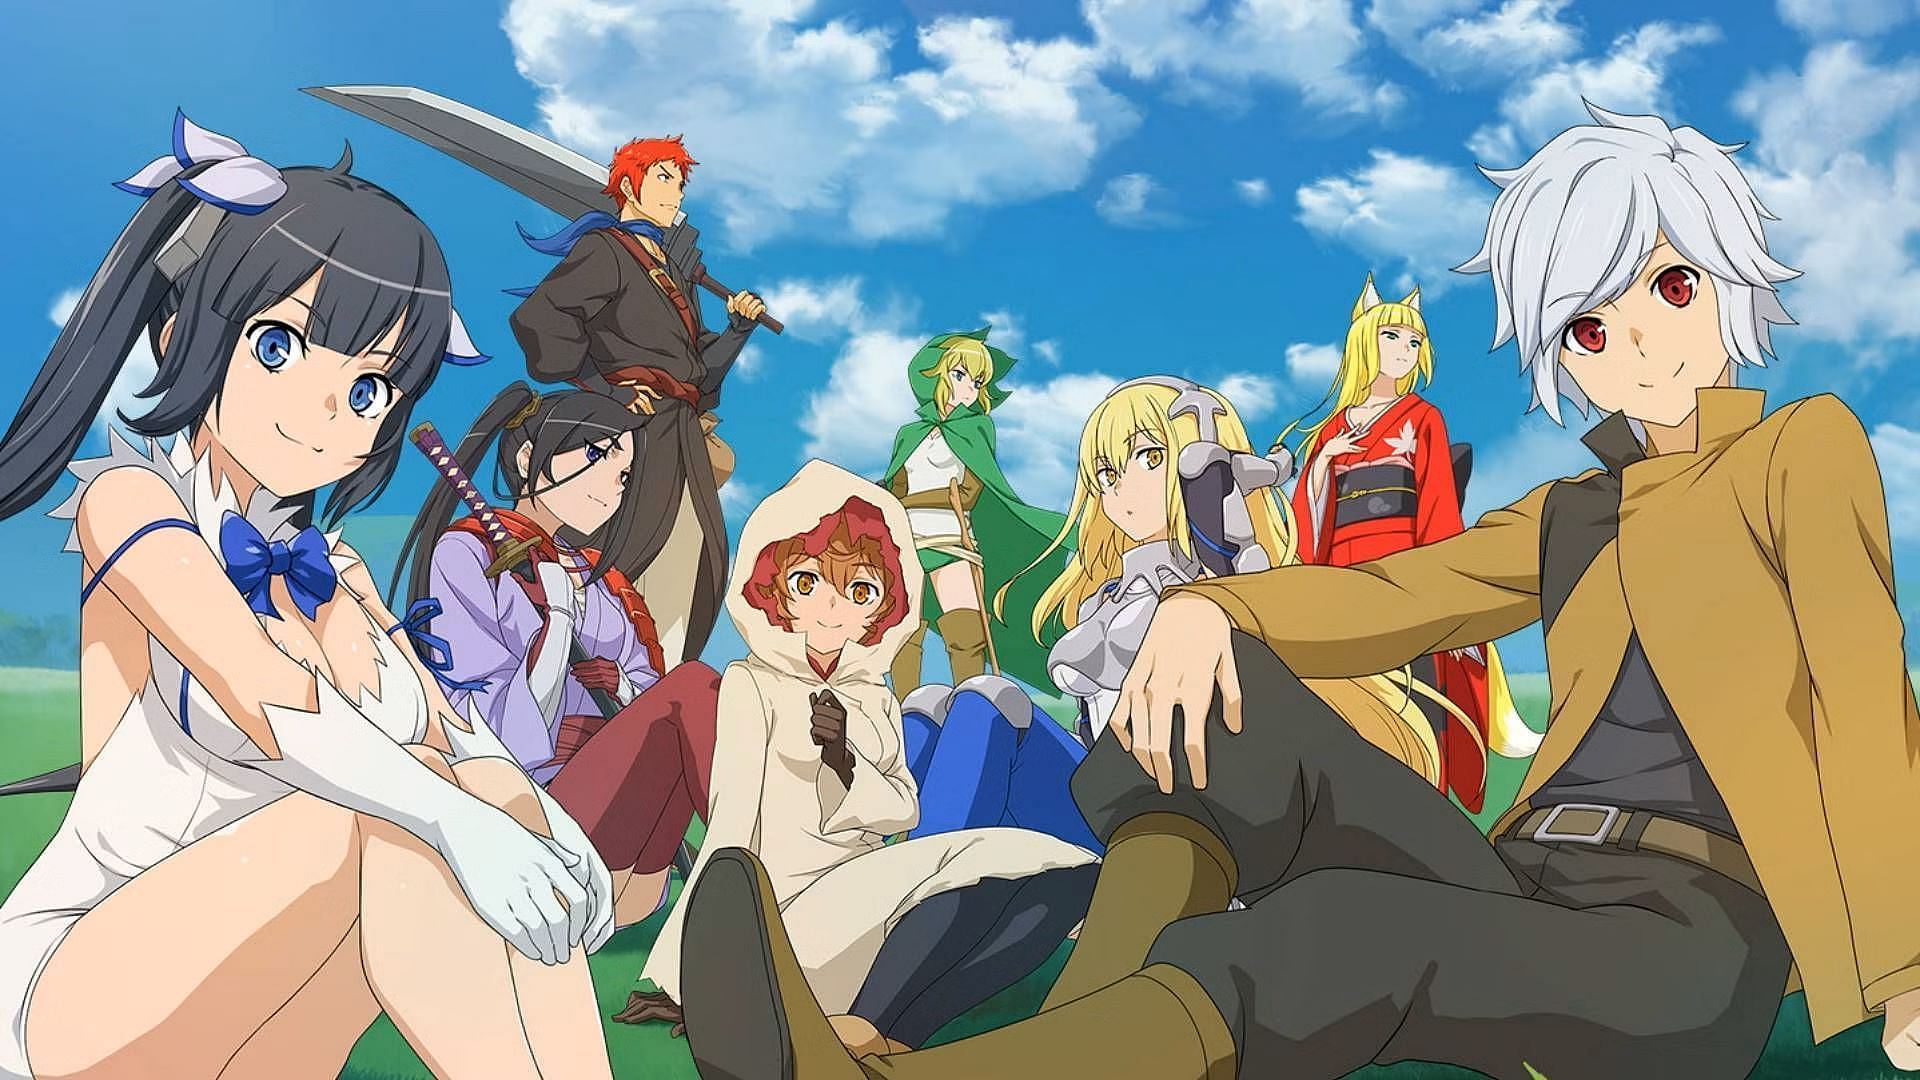 Bell and other important characters from the Danmachi anime (Image via J.C. Staff)